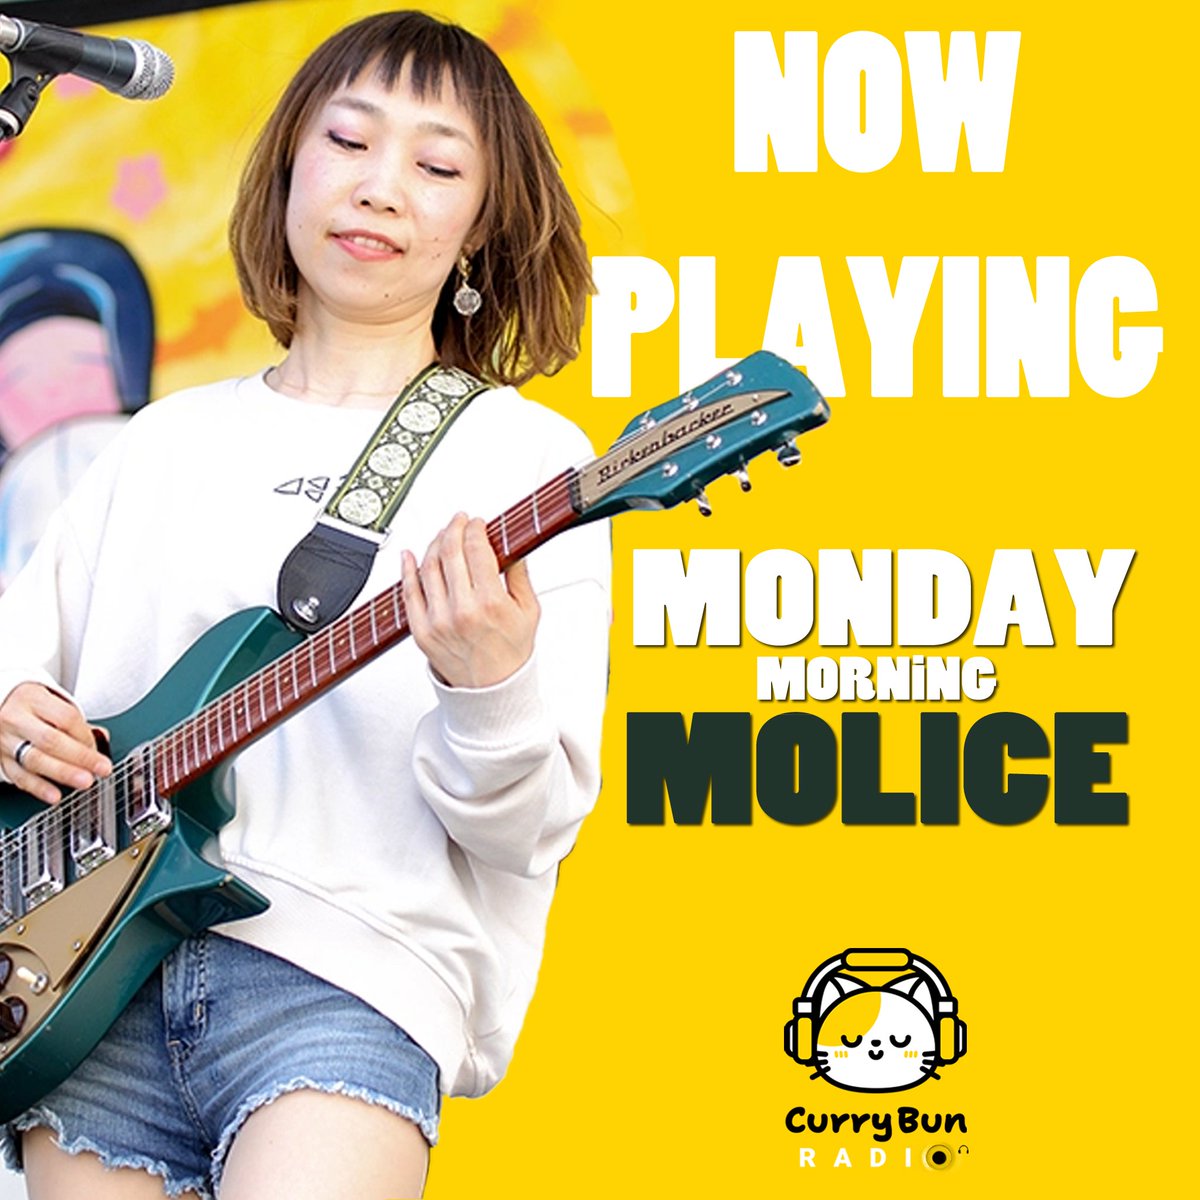 currybun.net/show/mmm/
It's here. It's TIME! IT MONDAY MORNING

#NowPlaying️ #MondayMorning with #themolice and #currybunradio #japanese #indie #rock